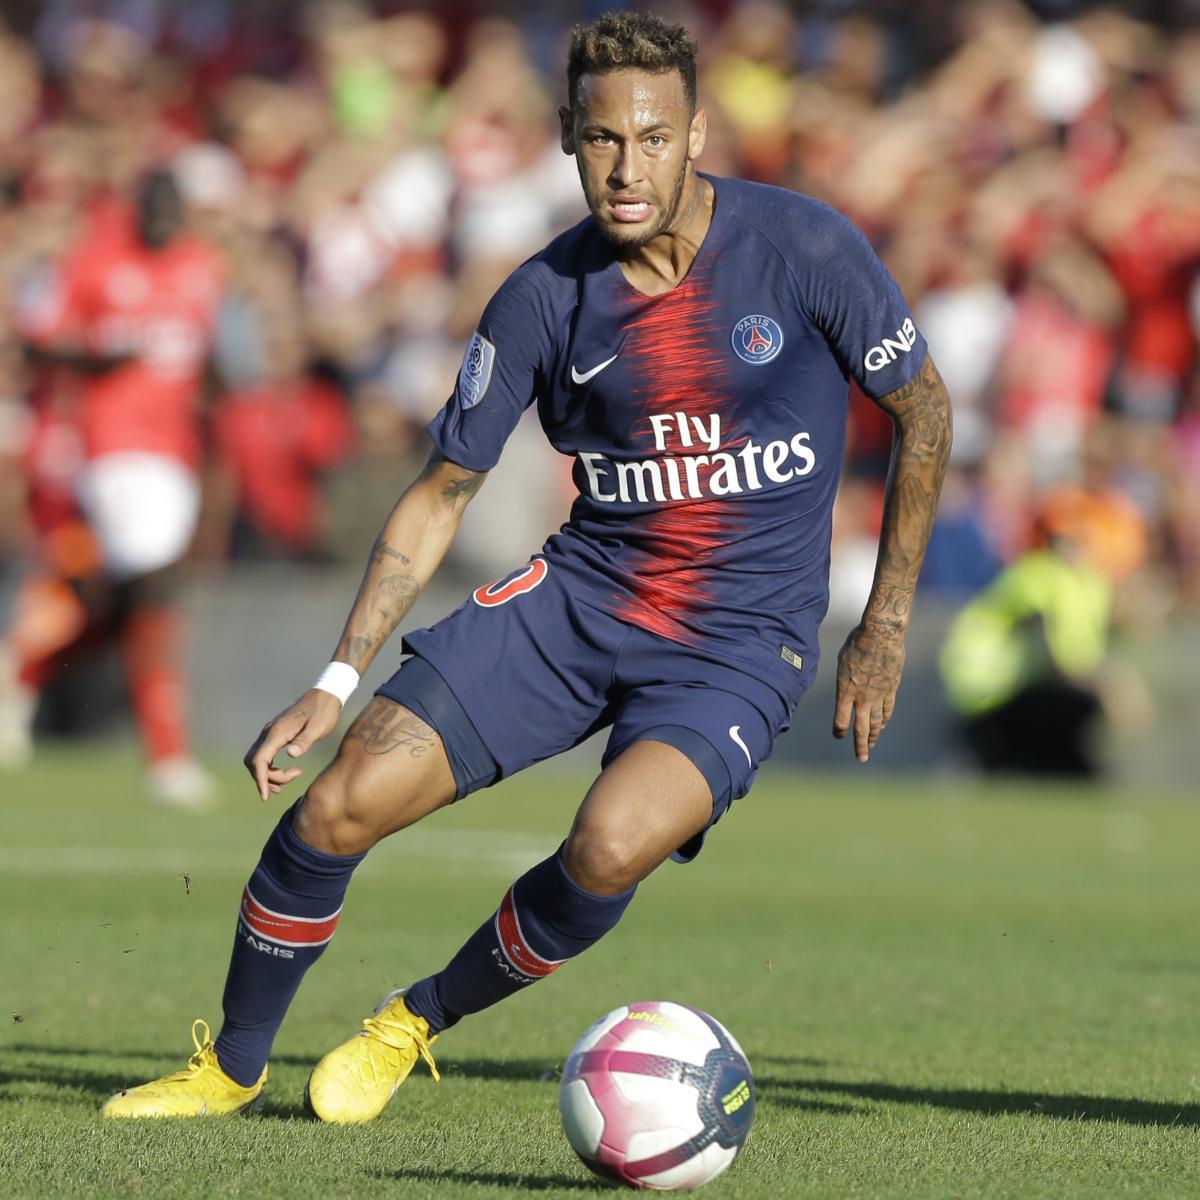 Neymar Reportedly Has 2019 Transfer 'Agreement in Principle'